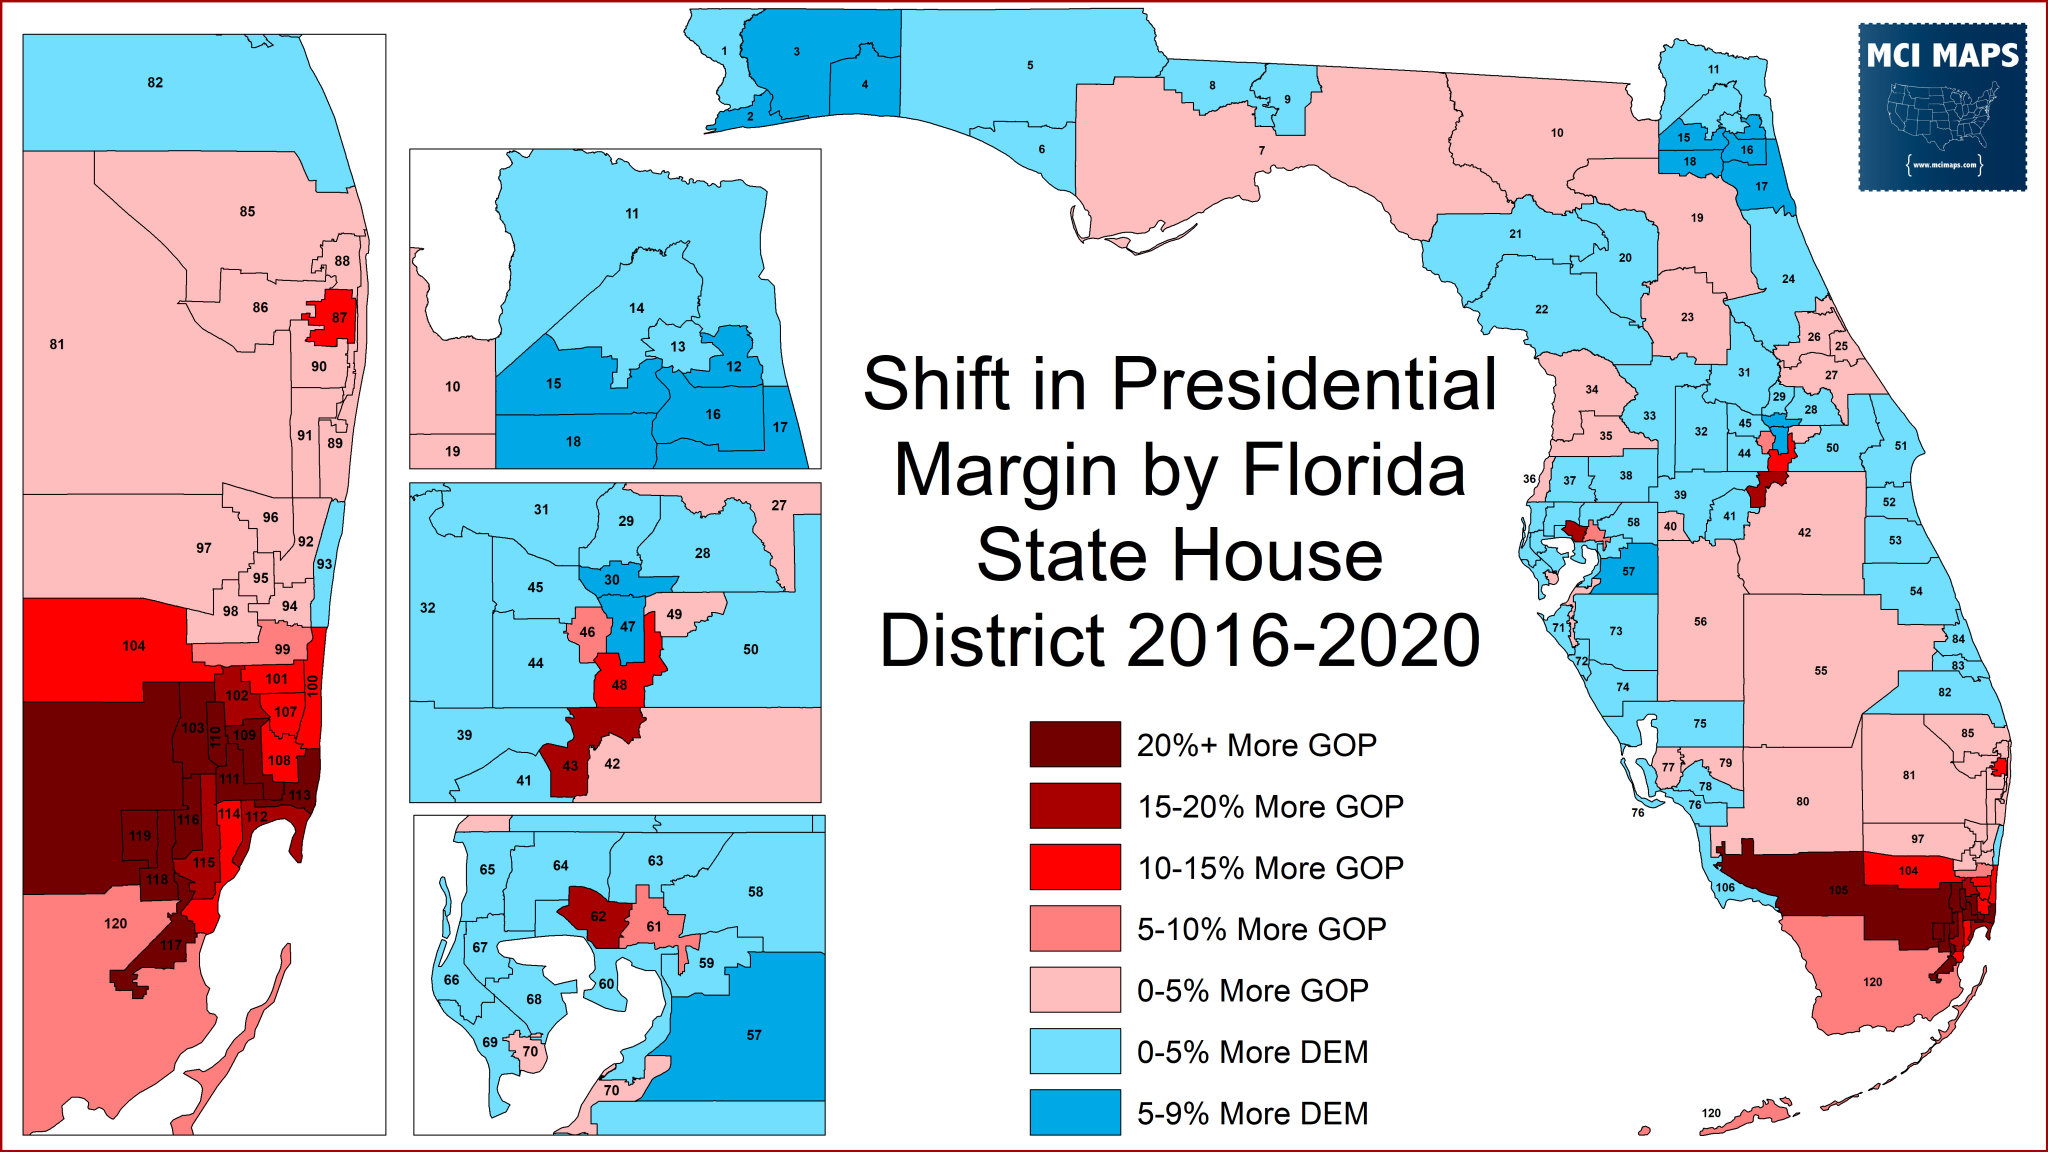 How Florida’s State House Districts Voted in 2020 MCI Maps Election